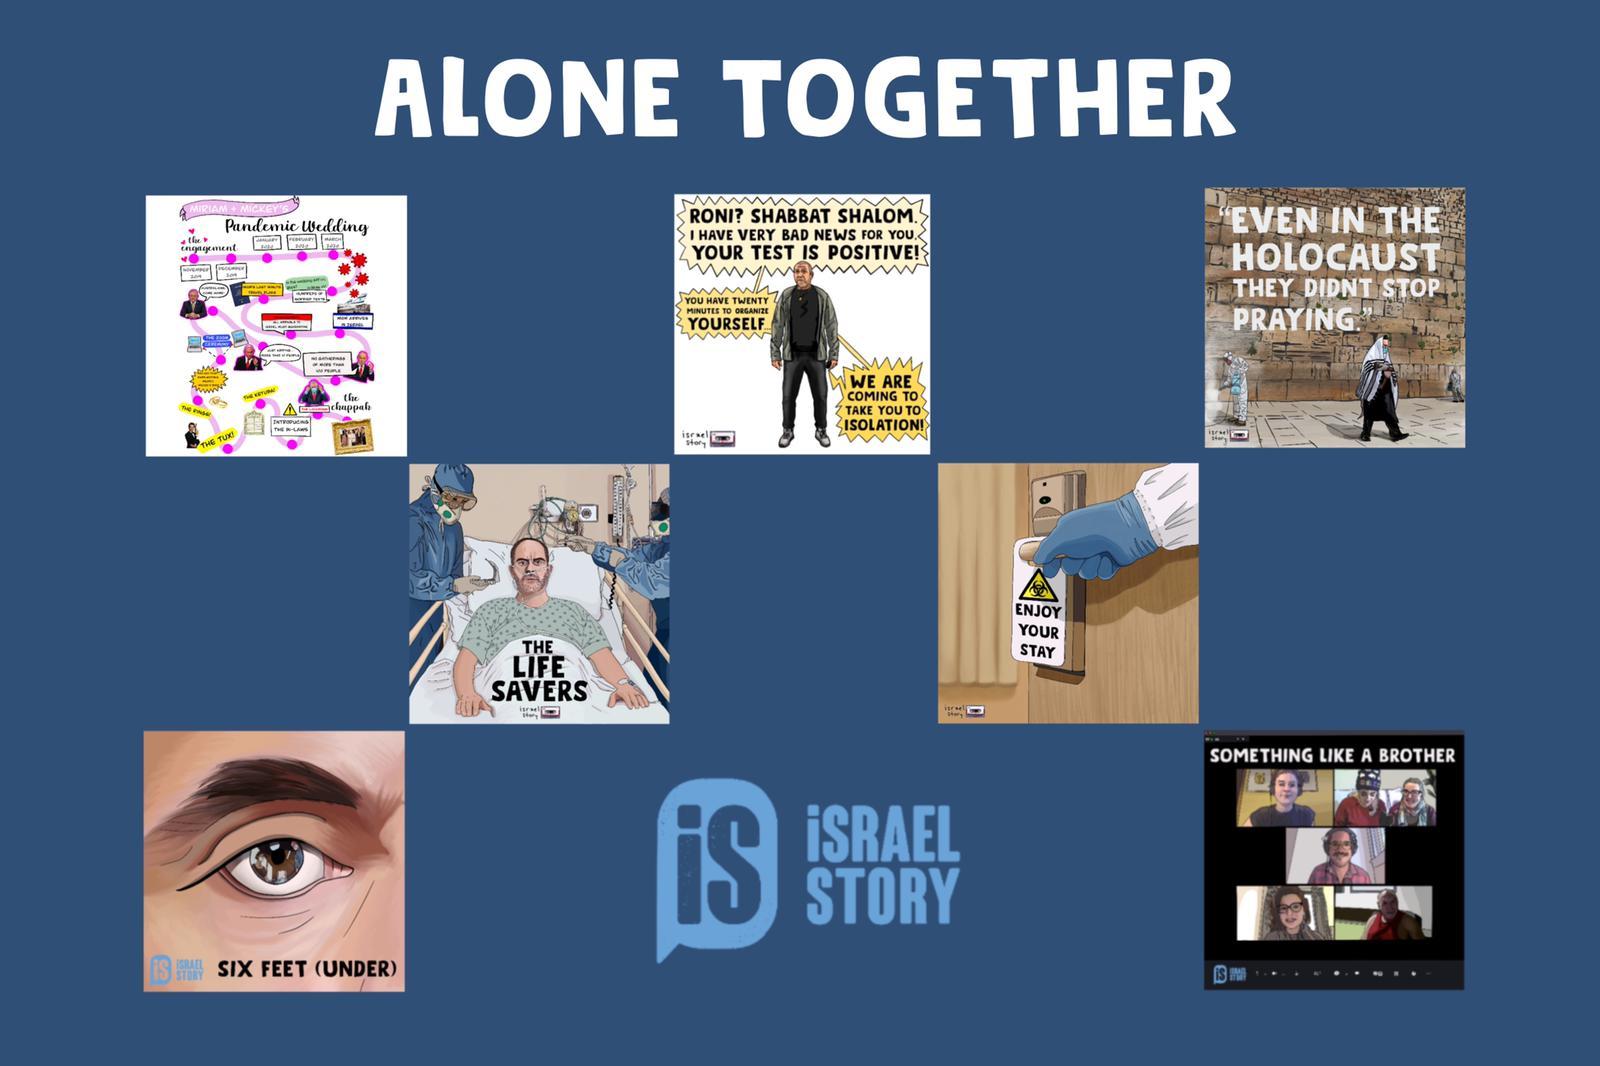 Introducing Our New Miniseries – “Alone, Together”